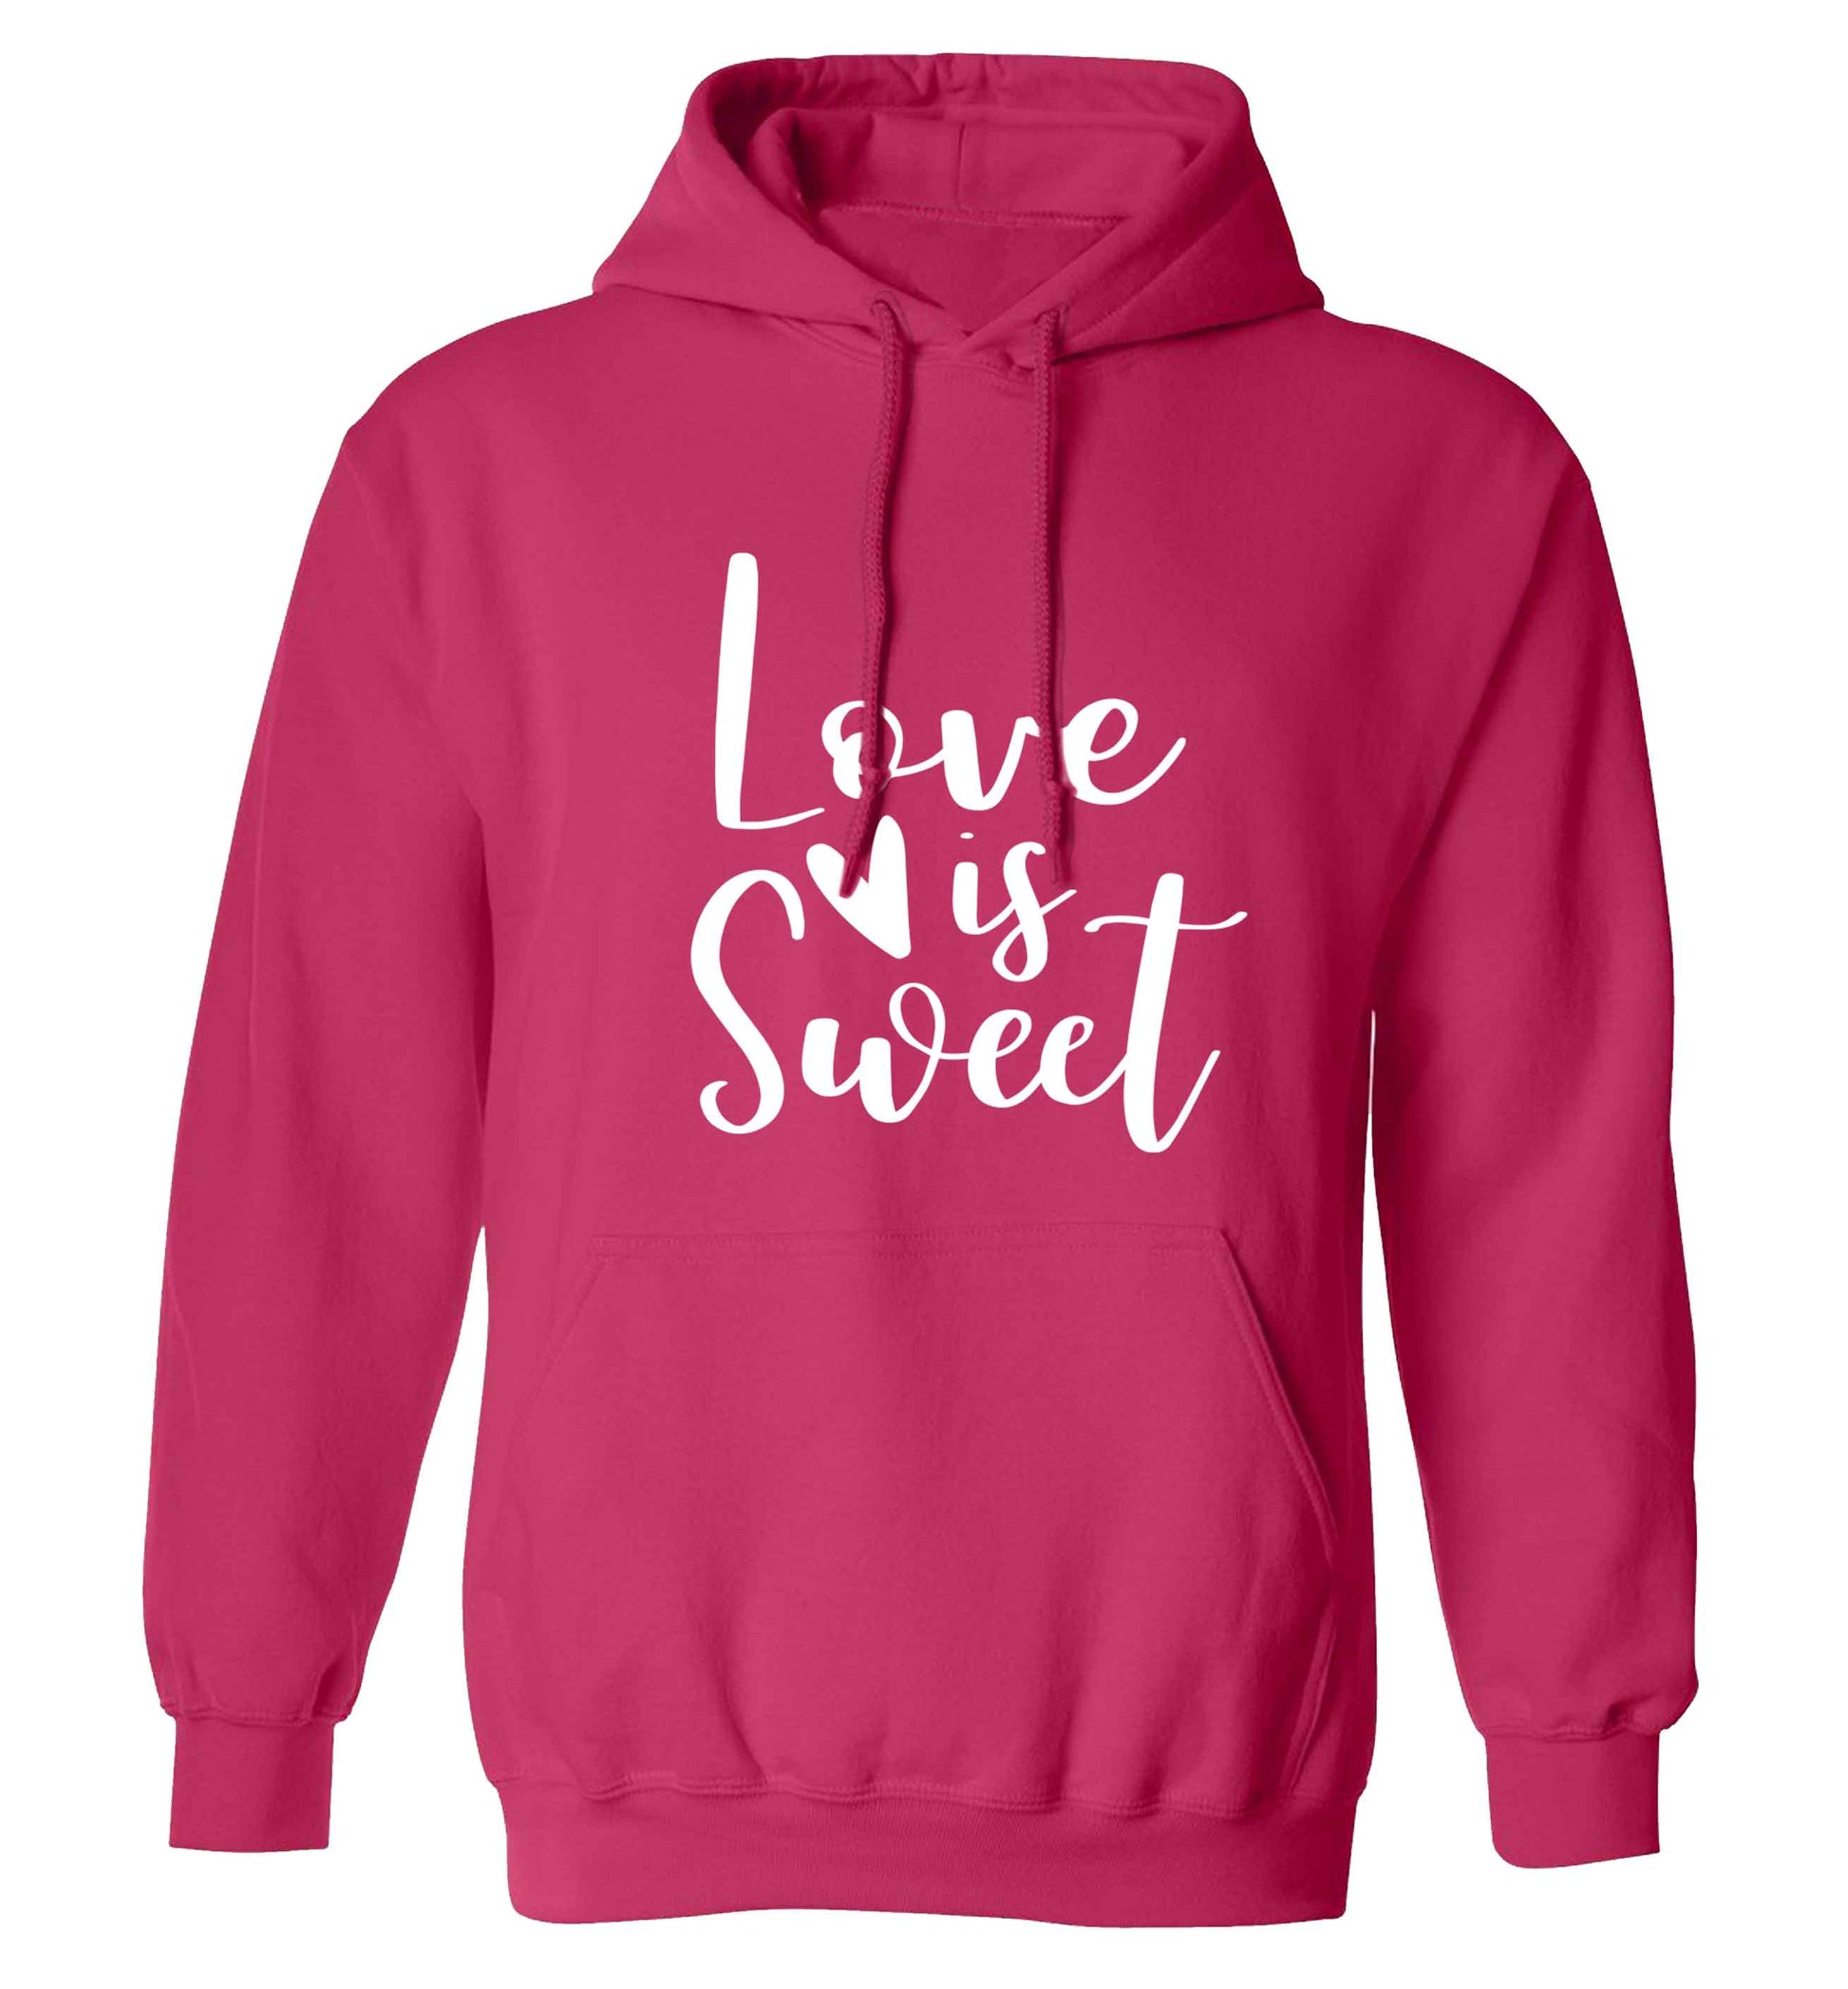 Love really does make the world go round! Ideal for weddings, valentines or just simply to show someone you love them!  adults unisex pink hoodie 2XL